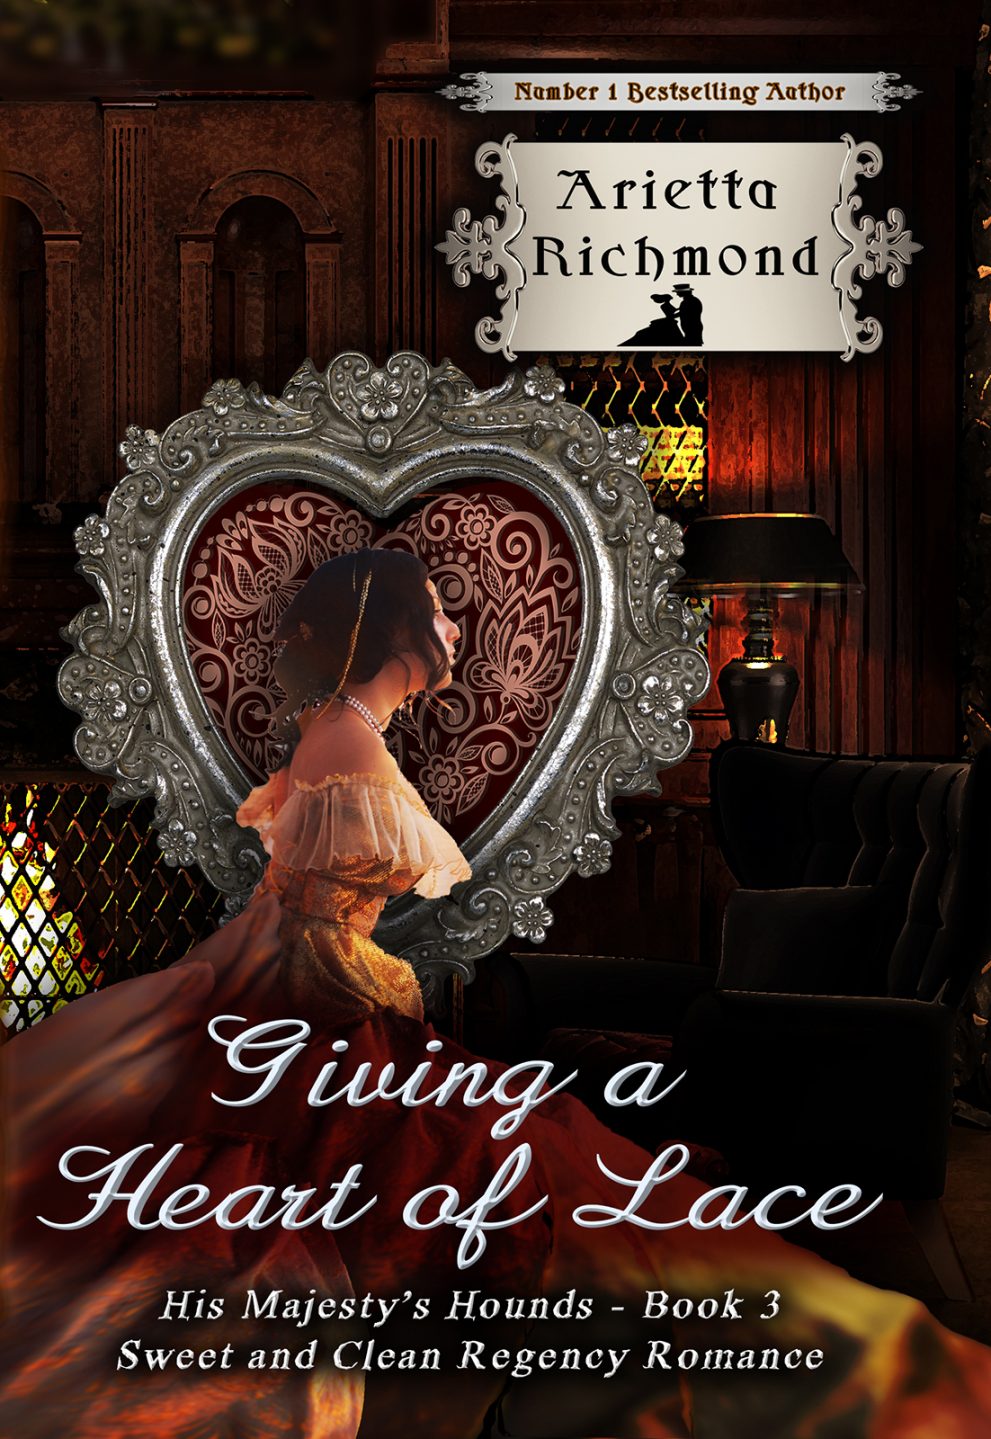 Giving a Heart of Lace